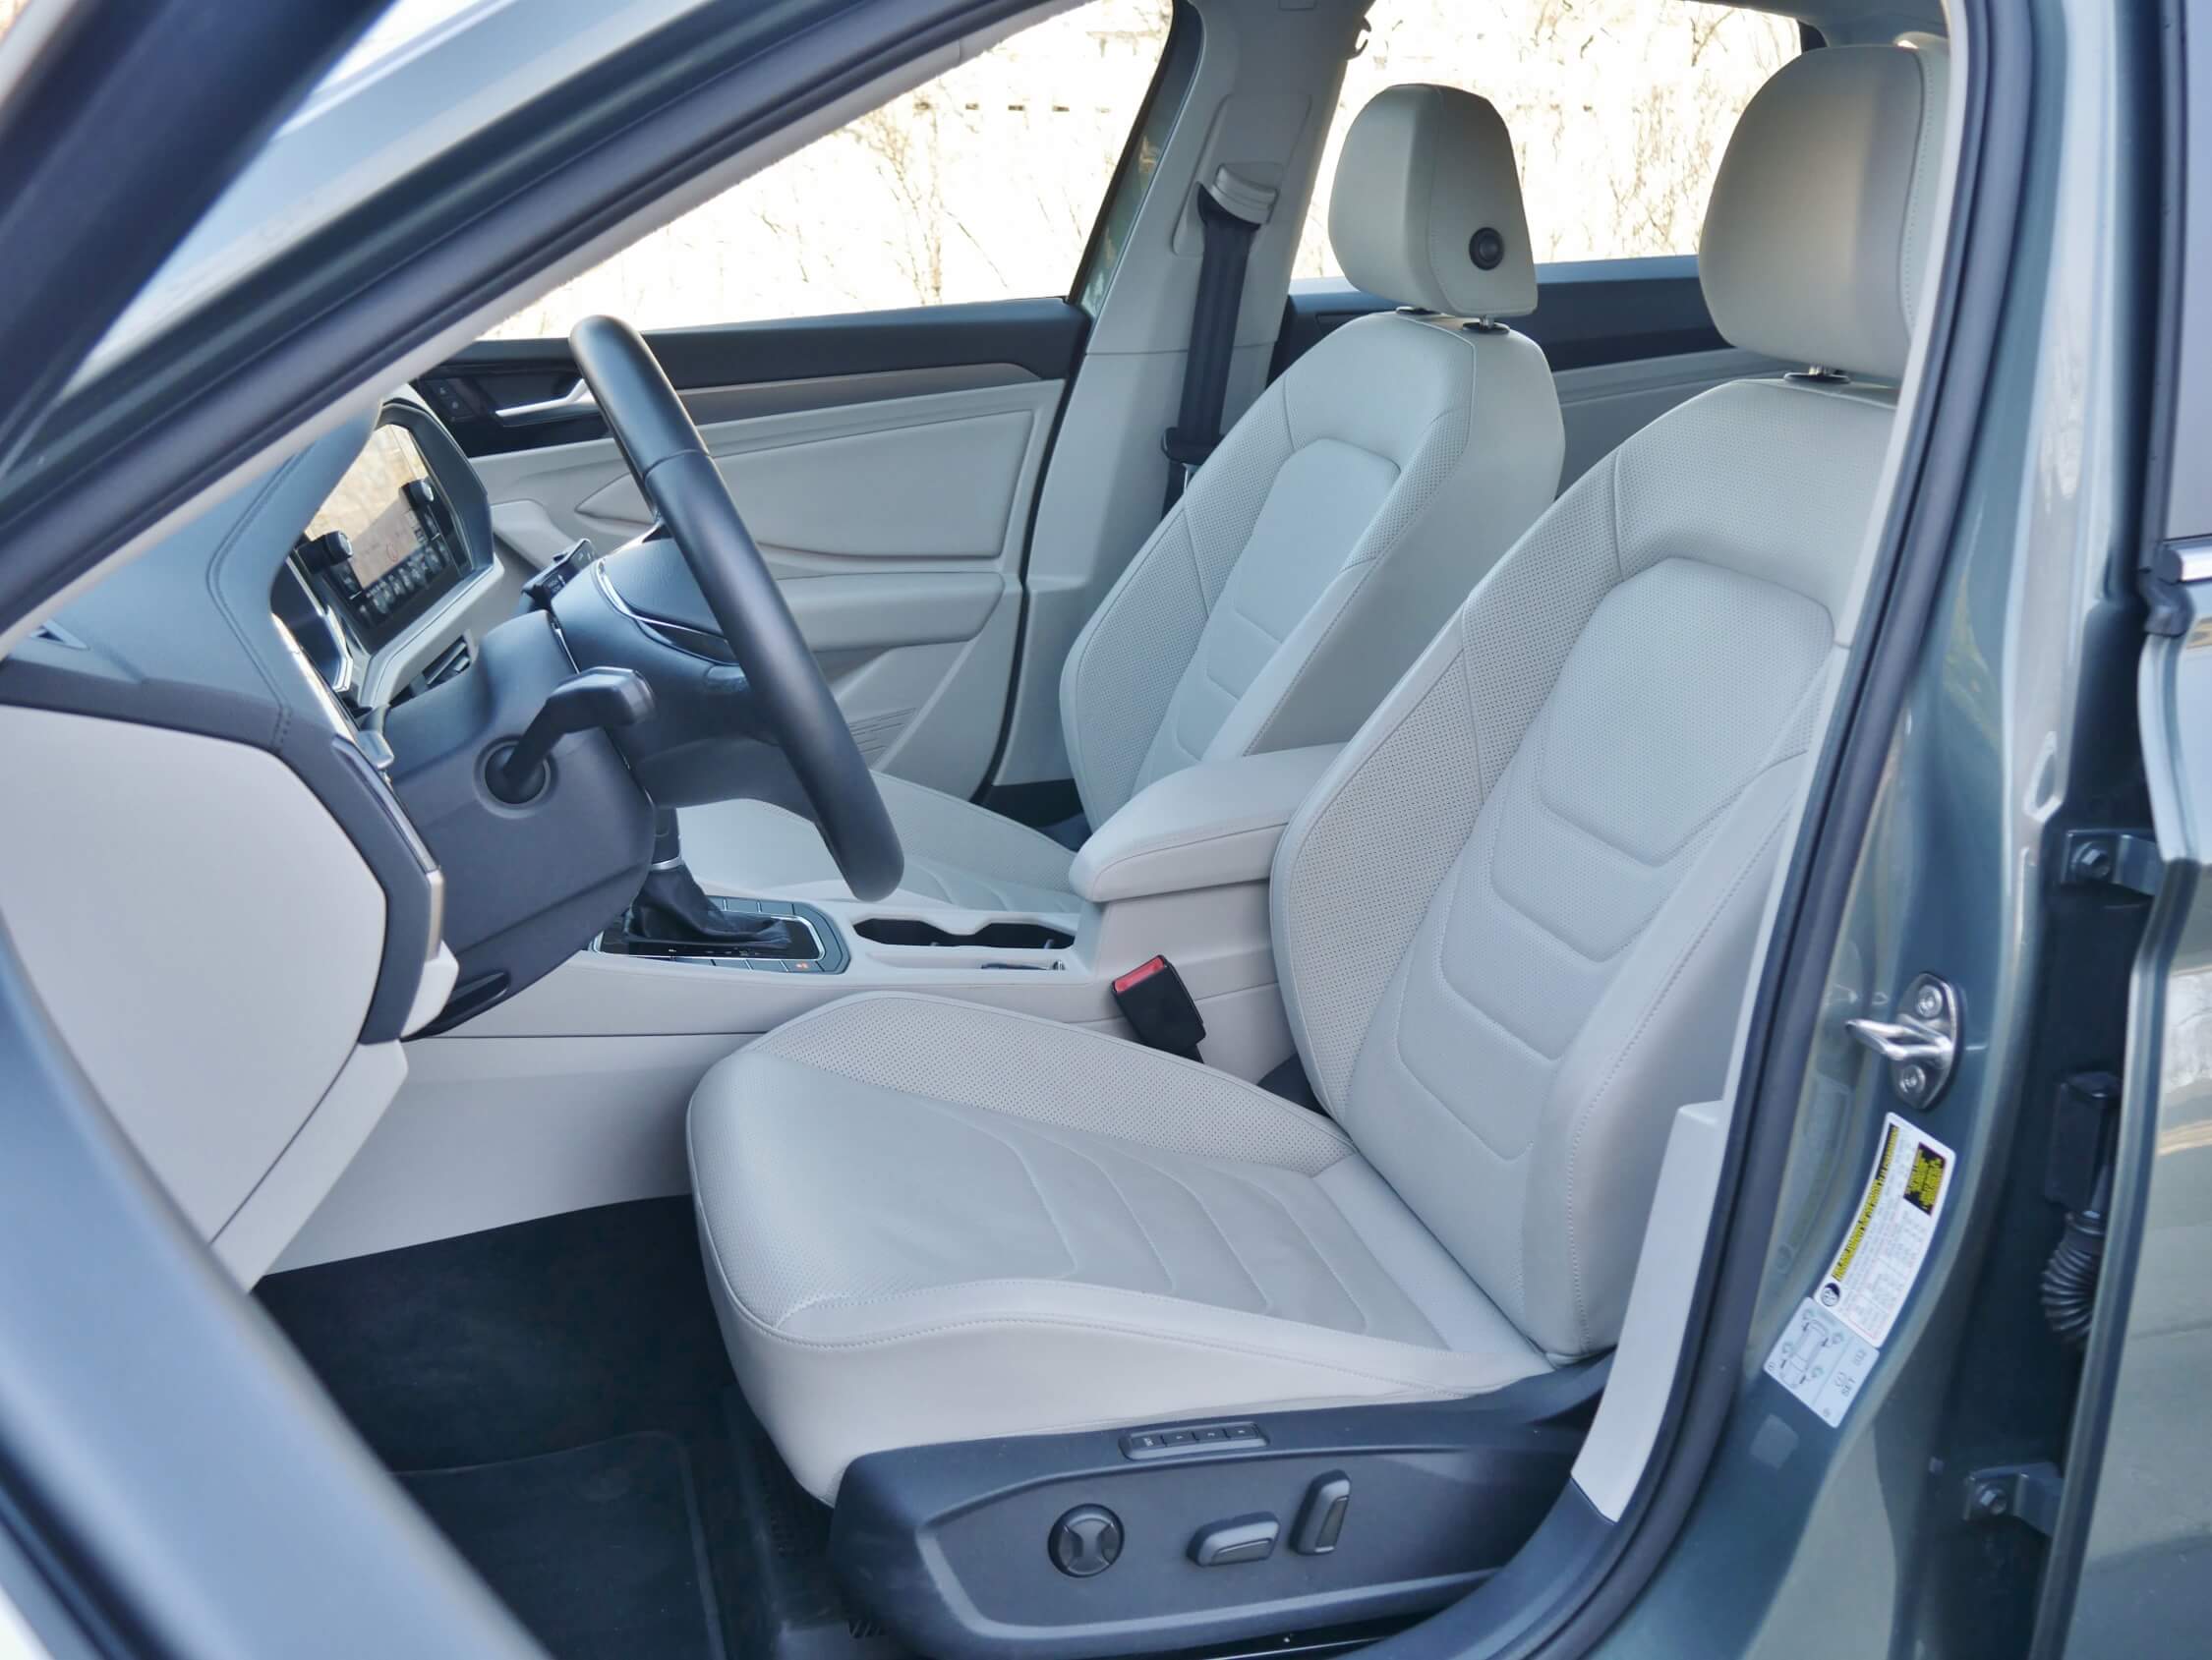 2019 Volkswagen Jetta SEL Premium: leather seats, heated cooled front, 8-way power driver's, 3-position driver's memory, heated tilt/ telescoping leather steering wheel